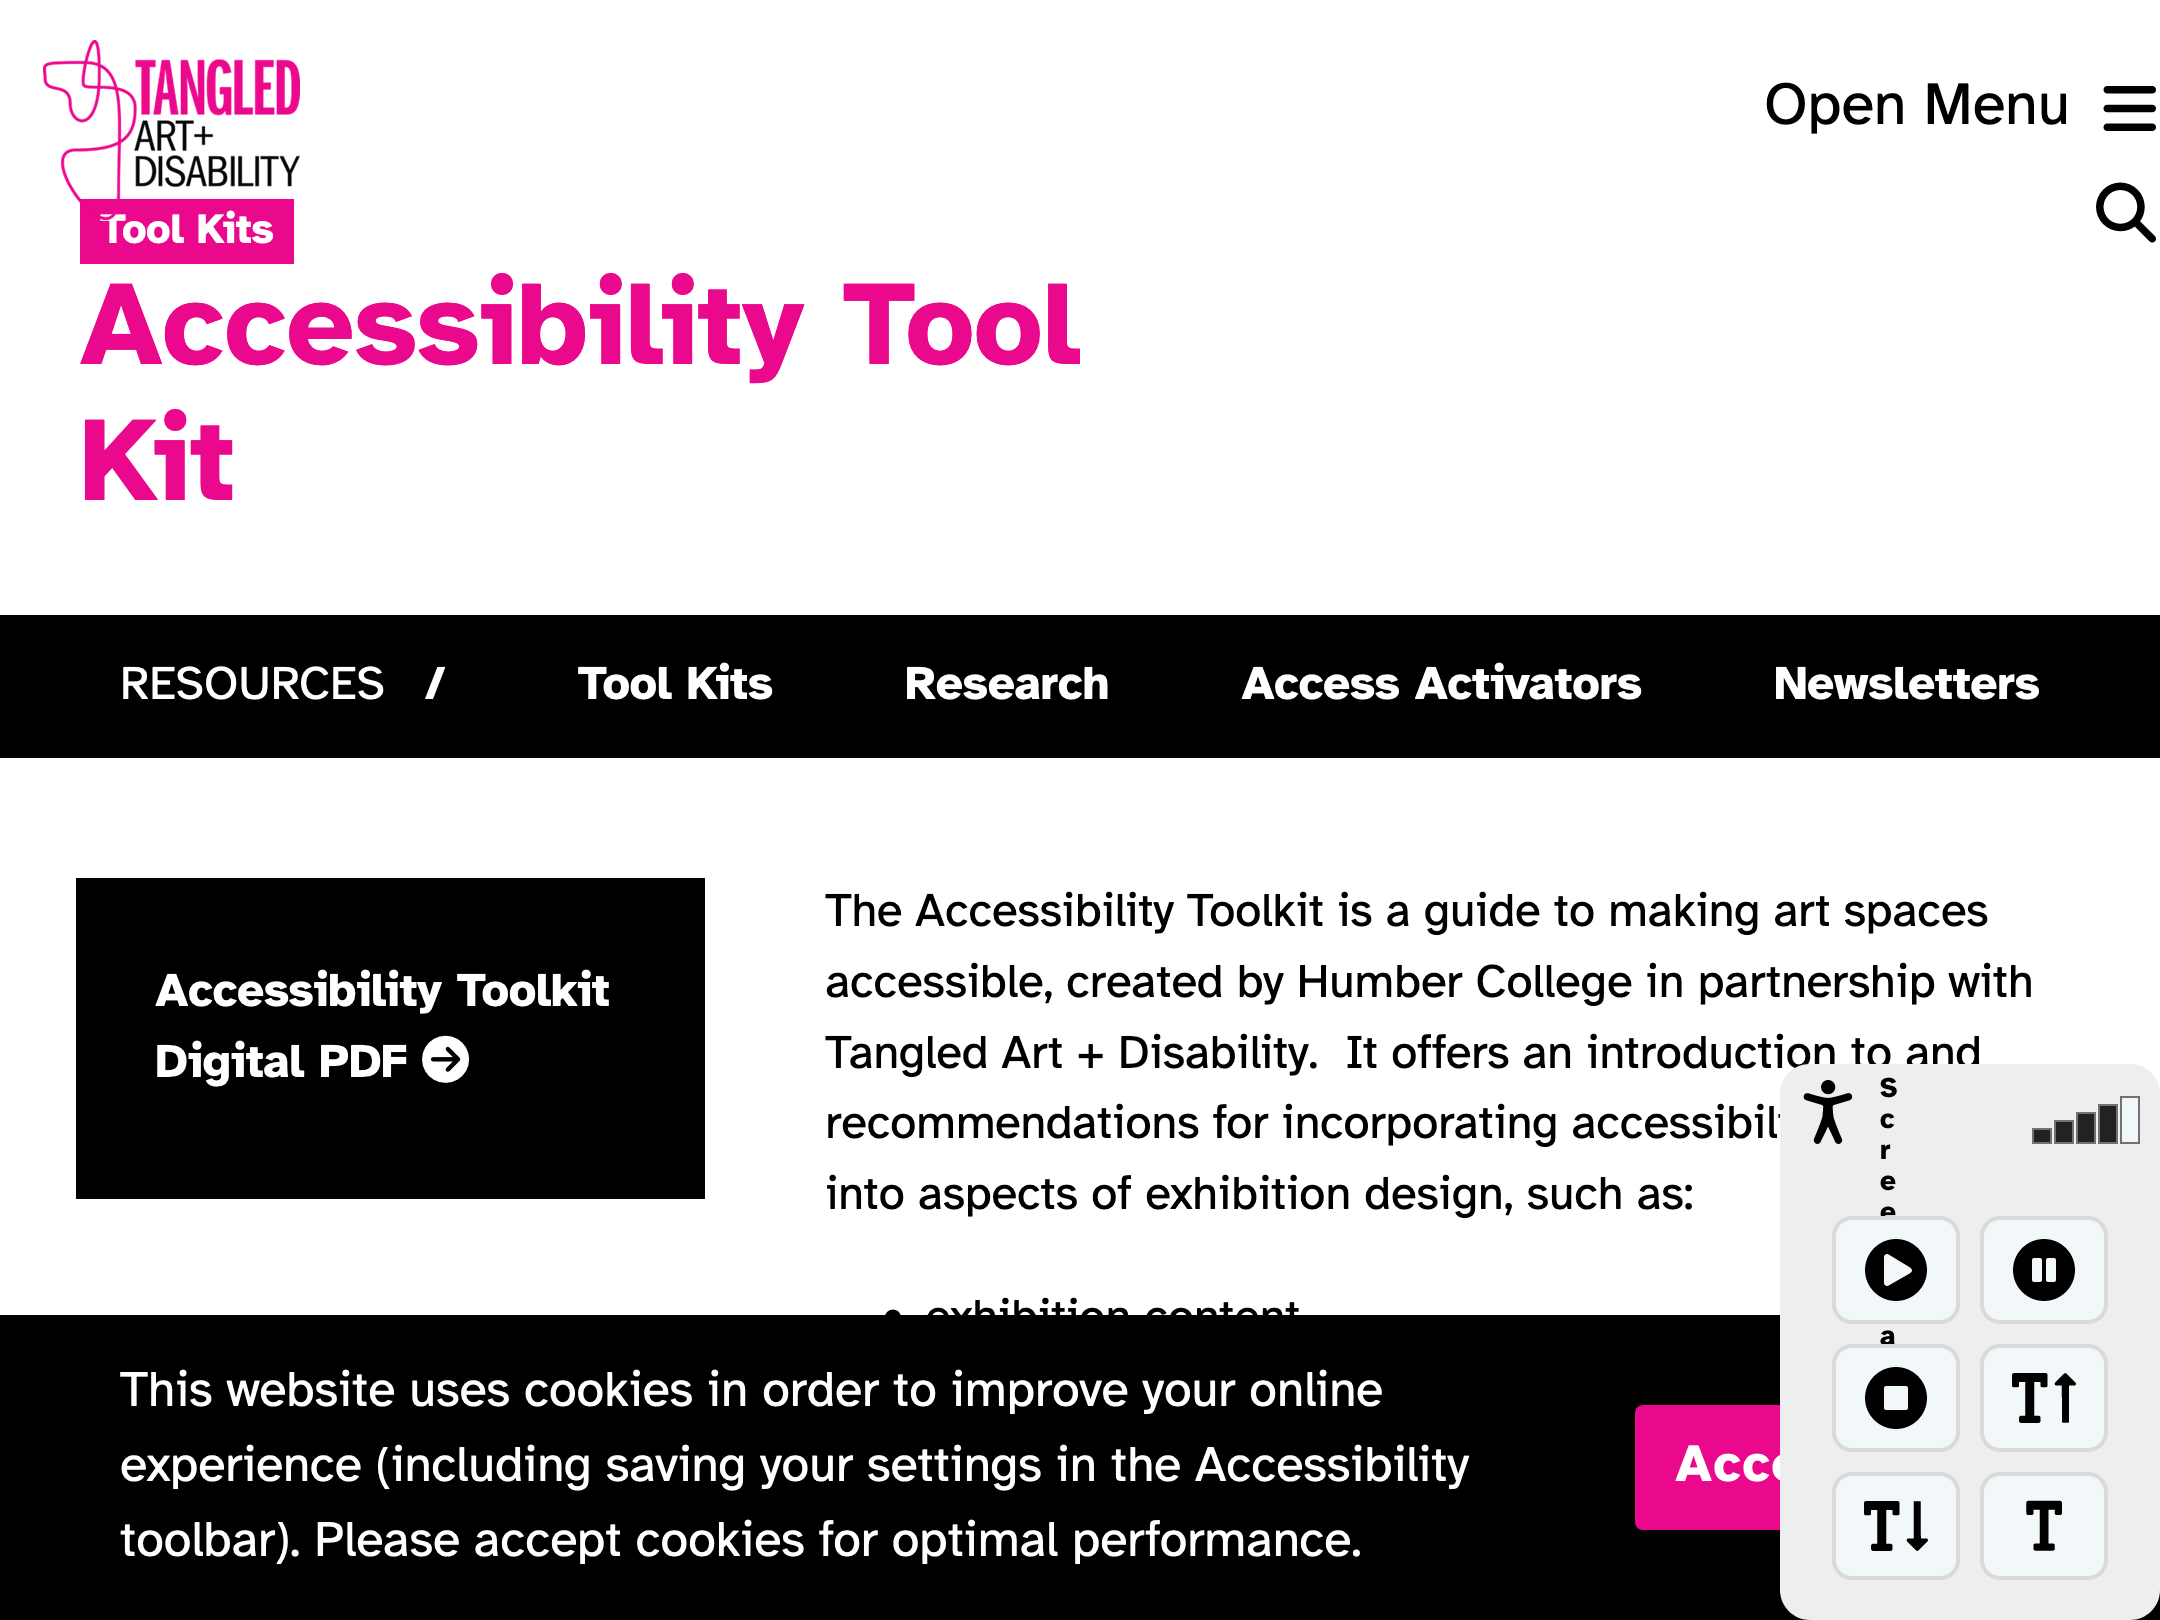 Accessibility tool kit on Tangled Art Disability website